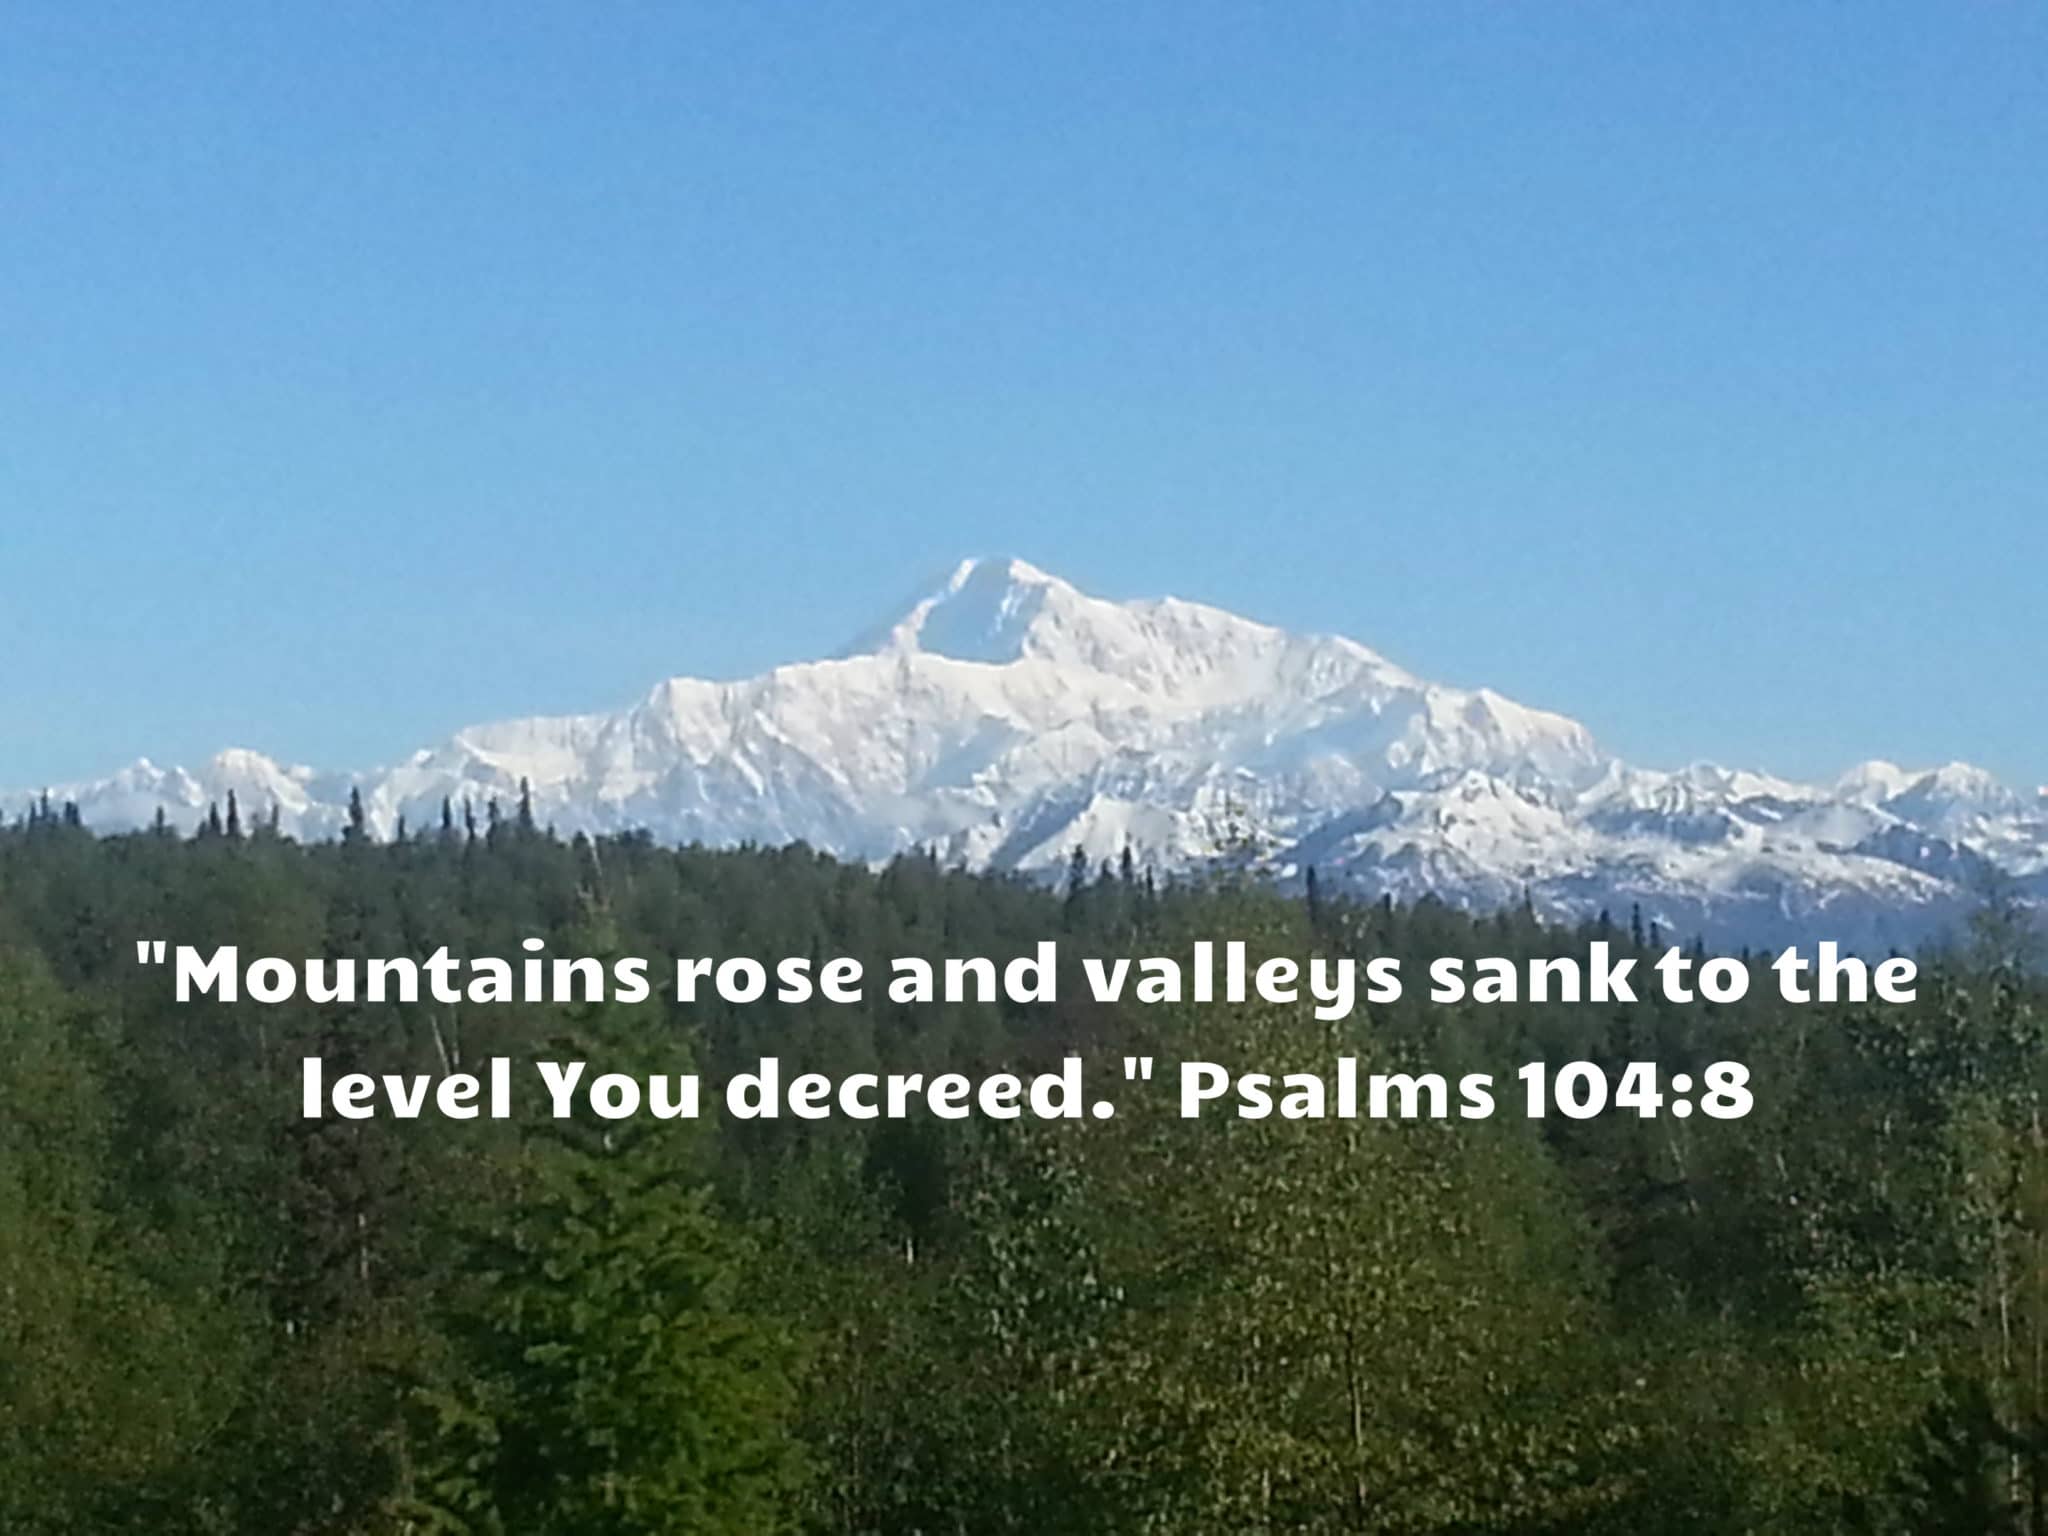 Mount-McKinley-with-Psalm-104-8